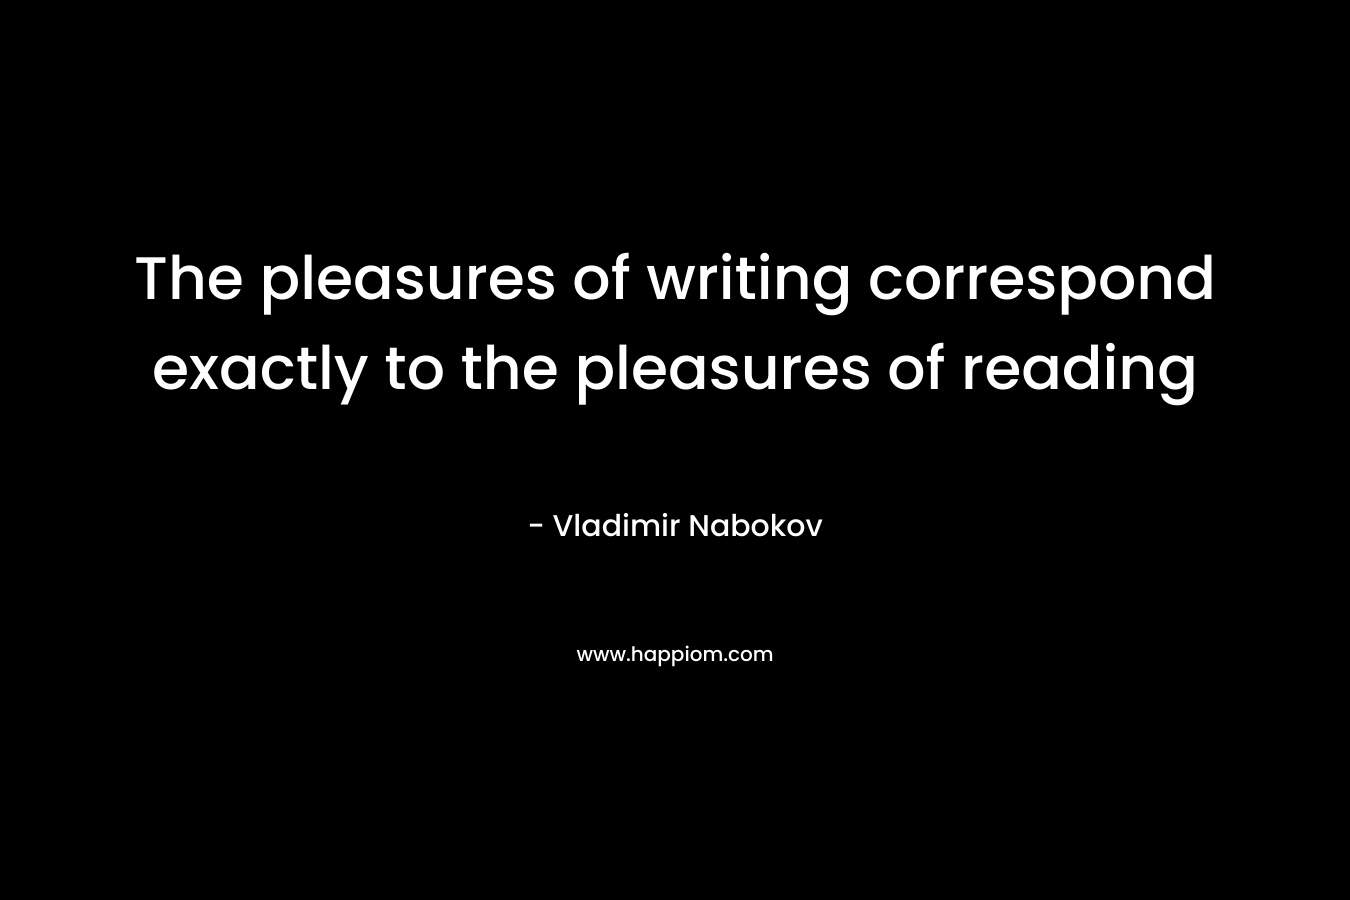 The pleasures of writing correspond exactly to the pleasures of reading